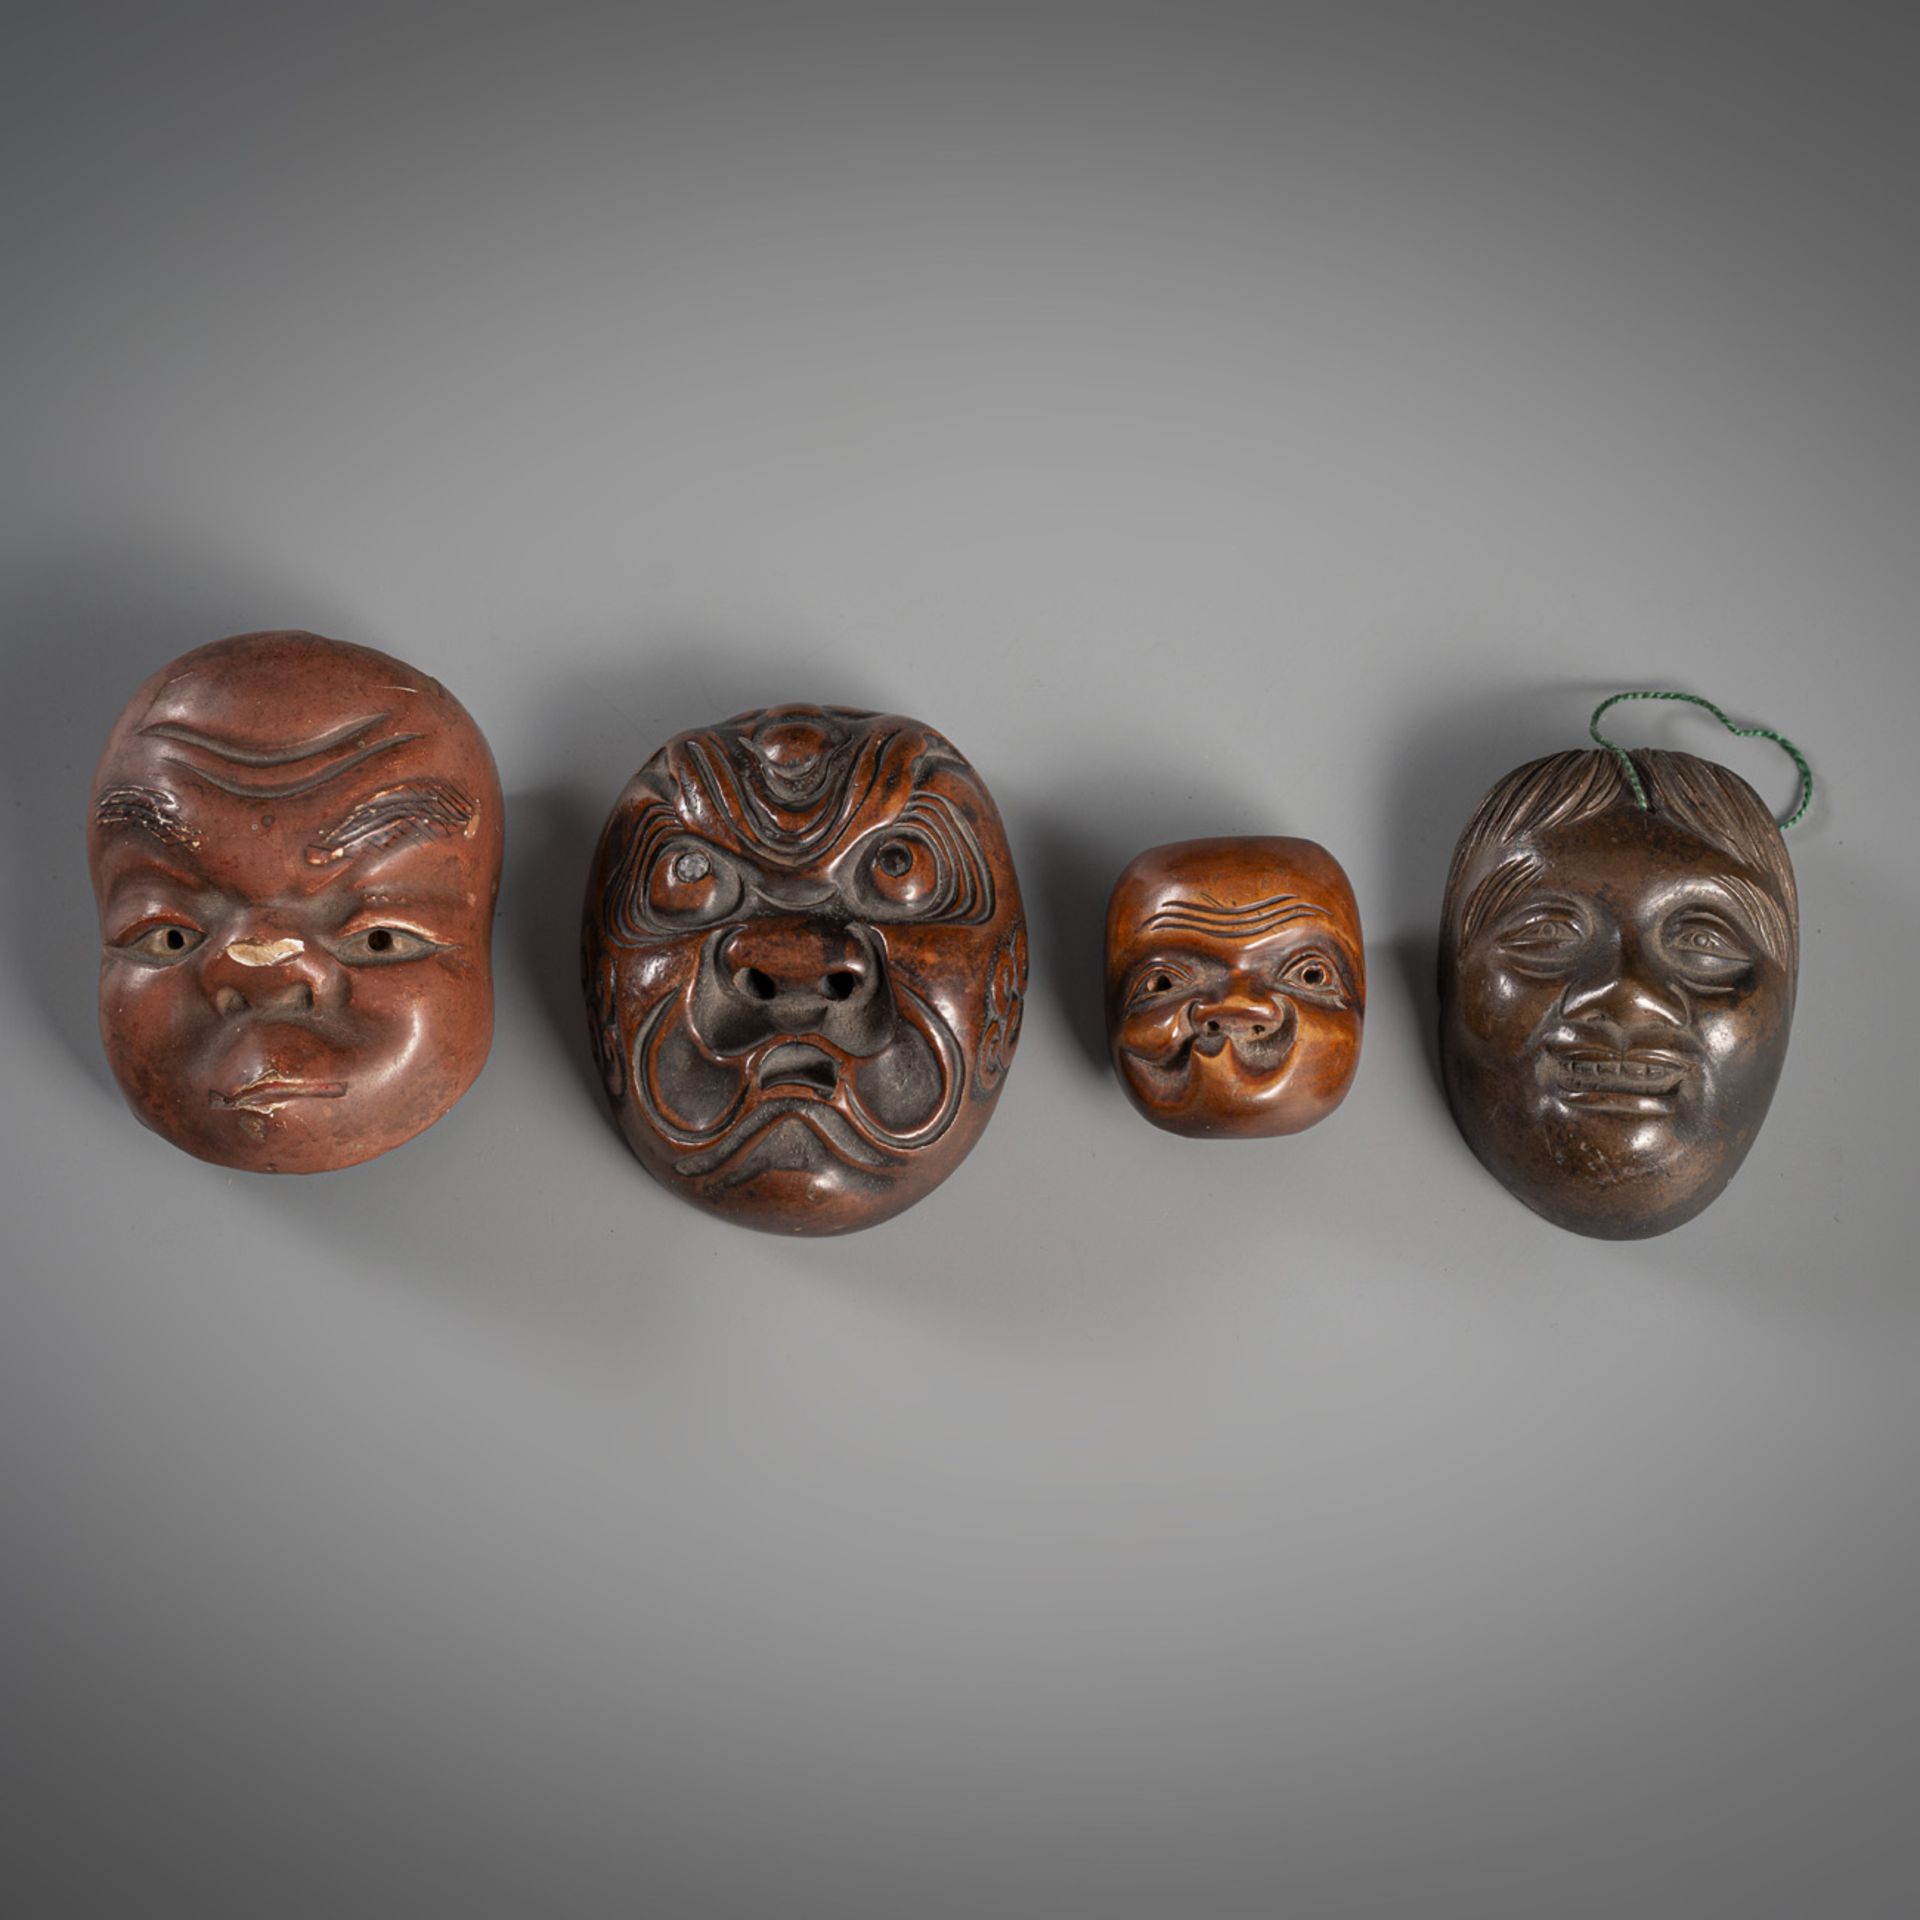 FOUR SMALL MASKS AMONG OTHERS TWO NETSUKE MADE OF WOOD, BRONZE AND CERAMIC